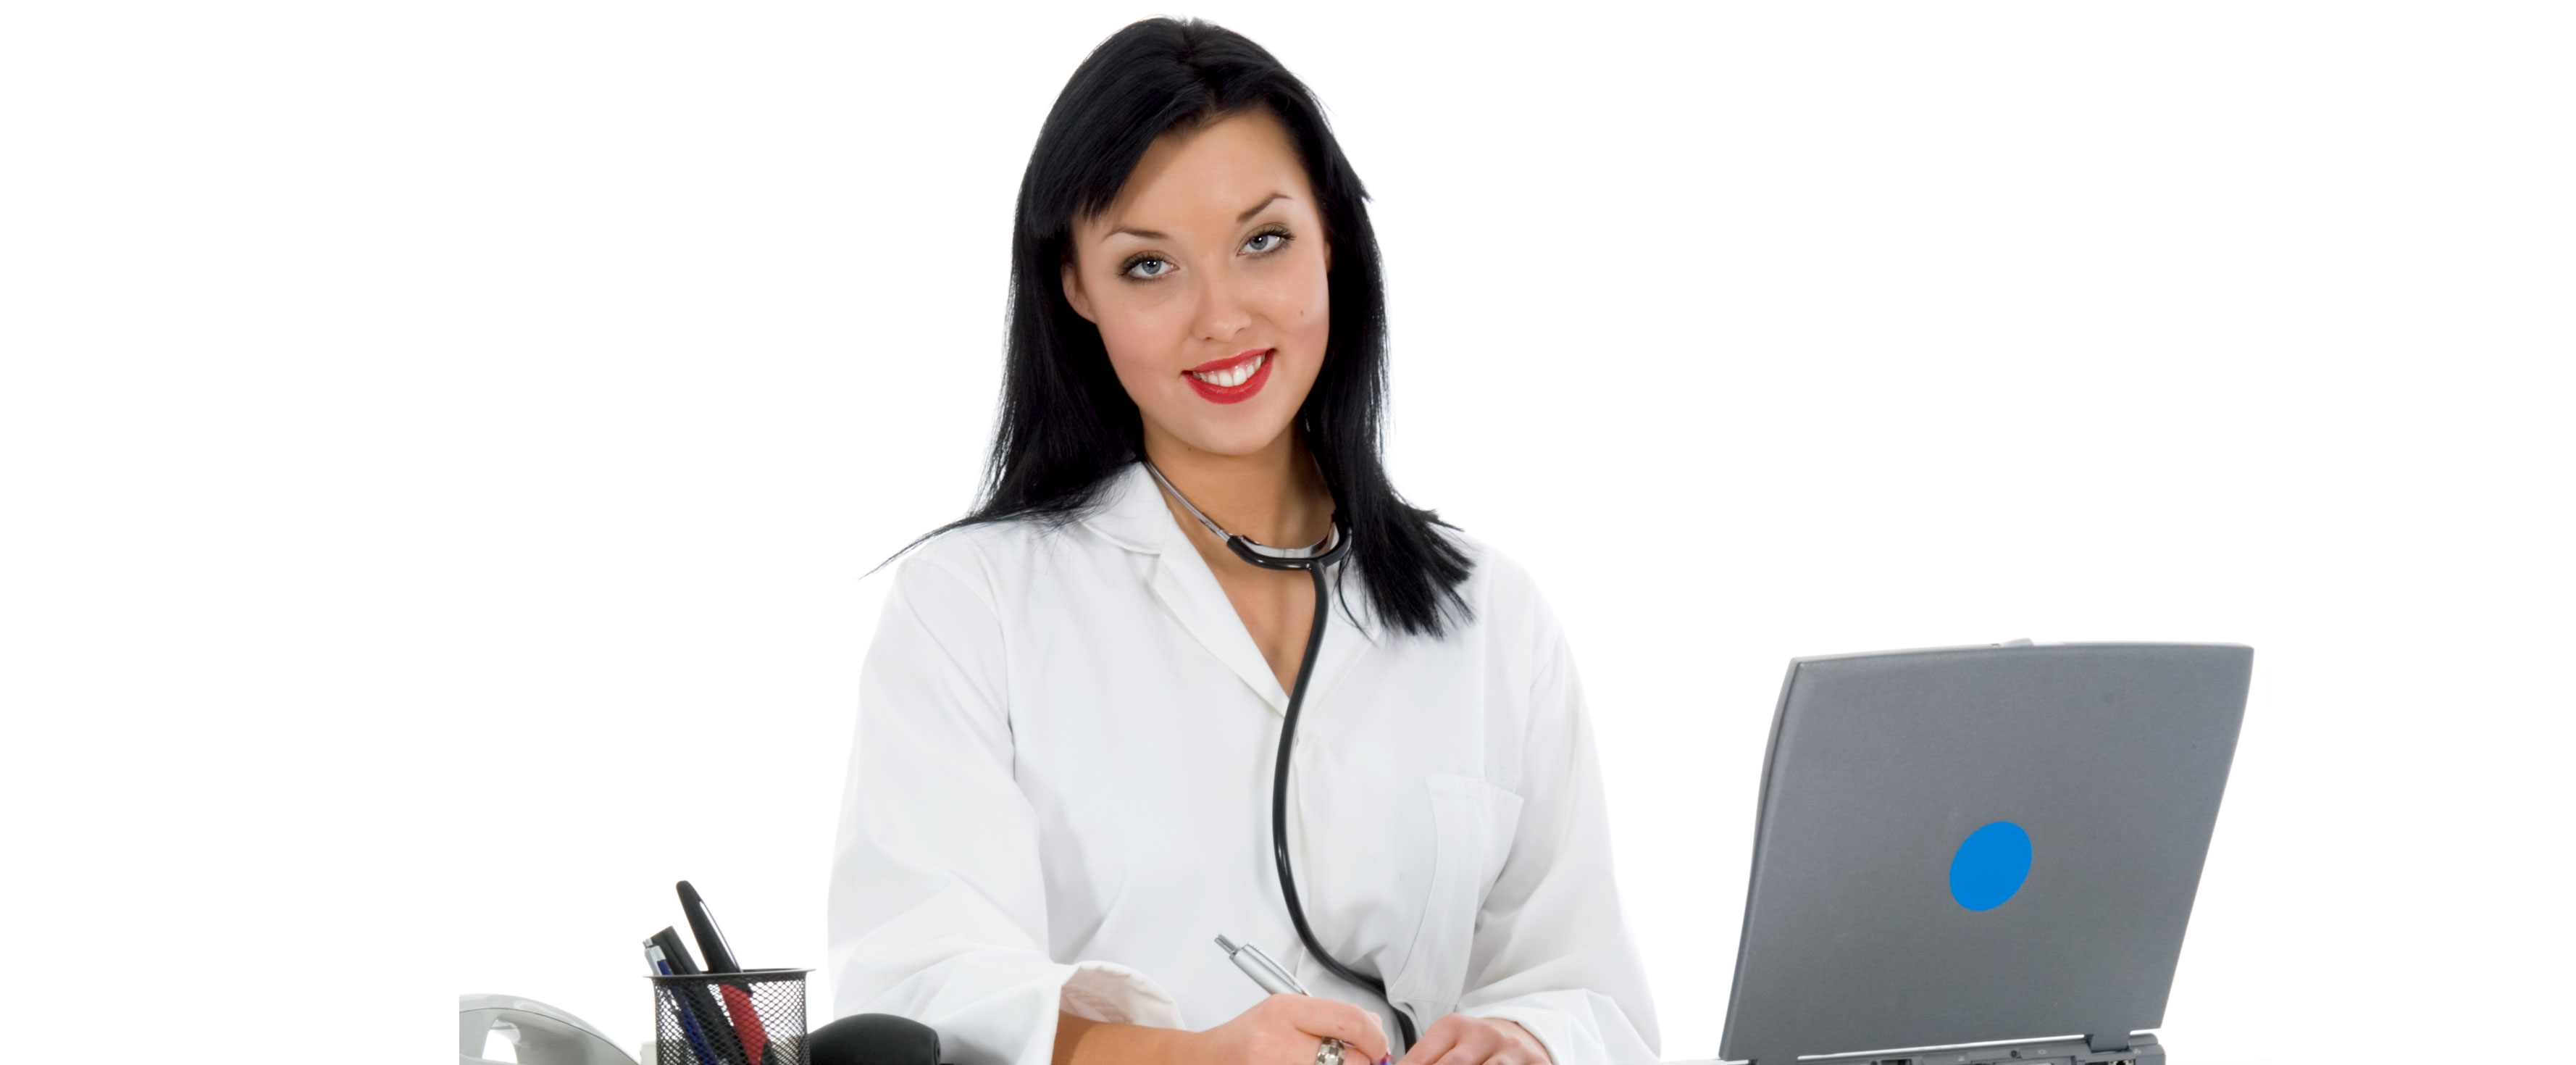 what does a medical assistant do?